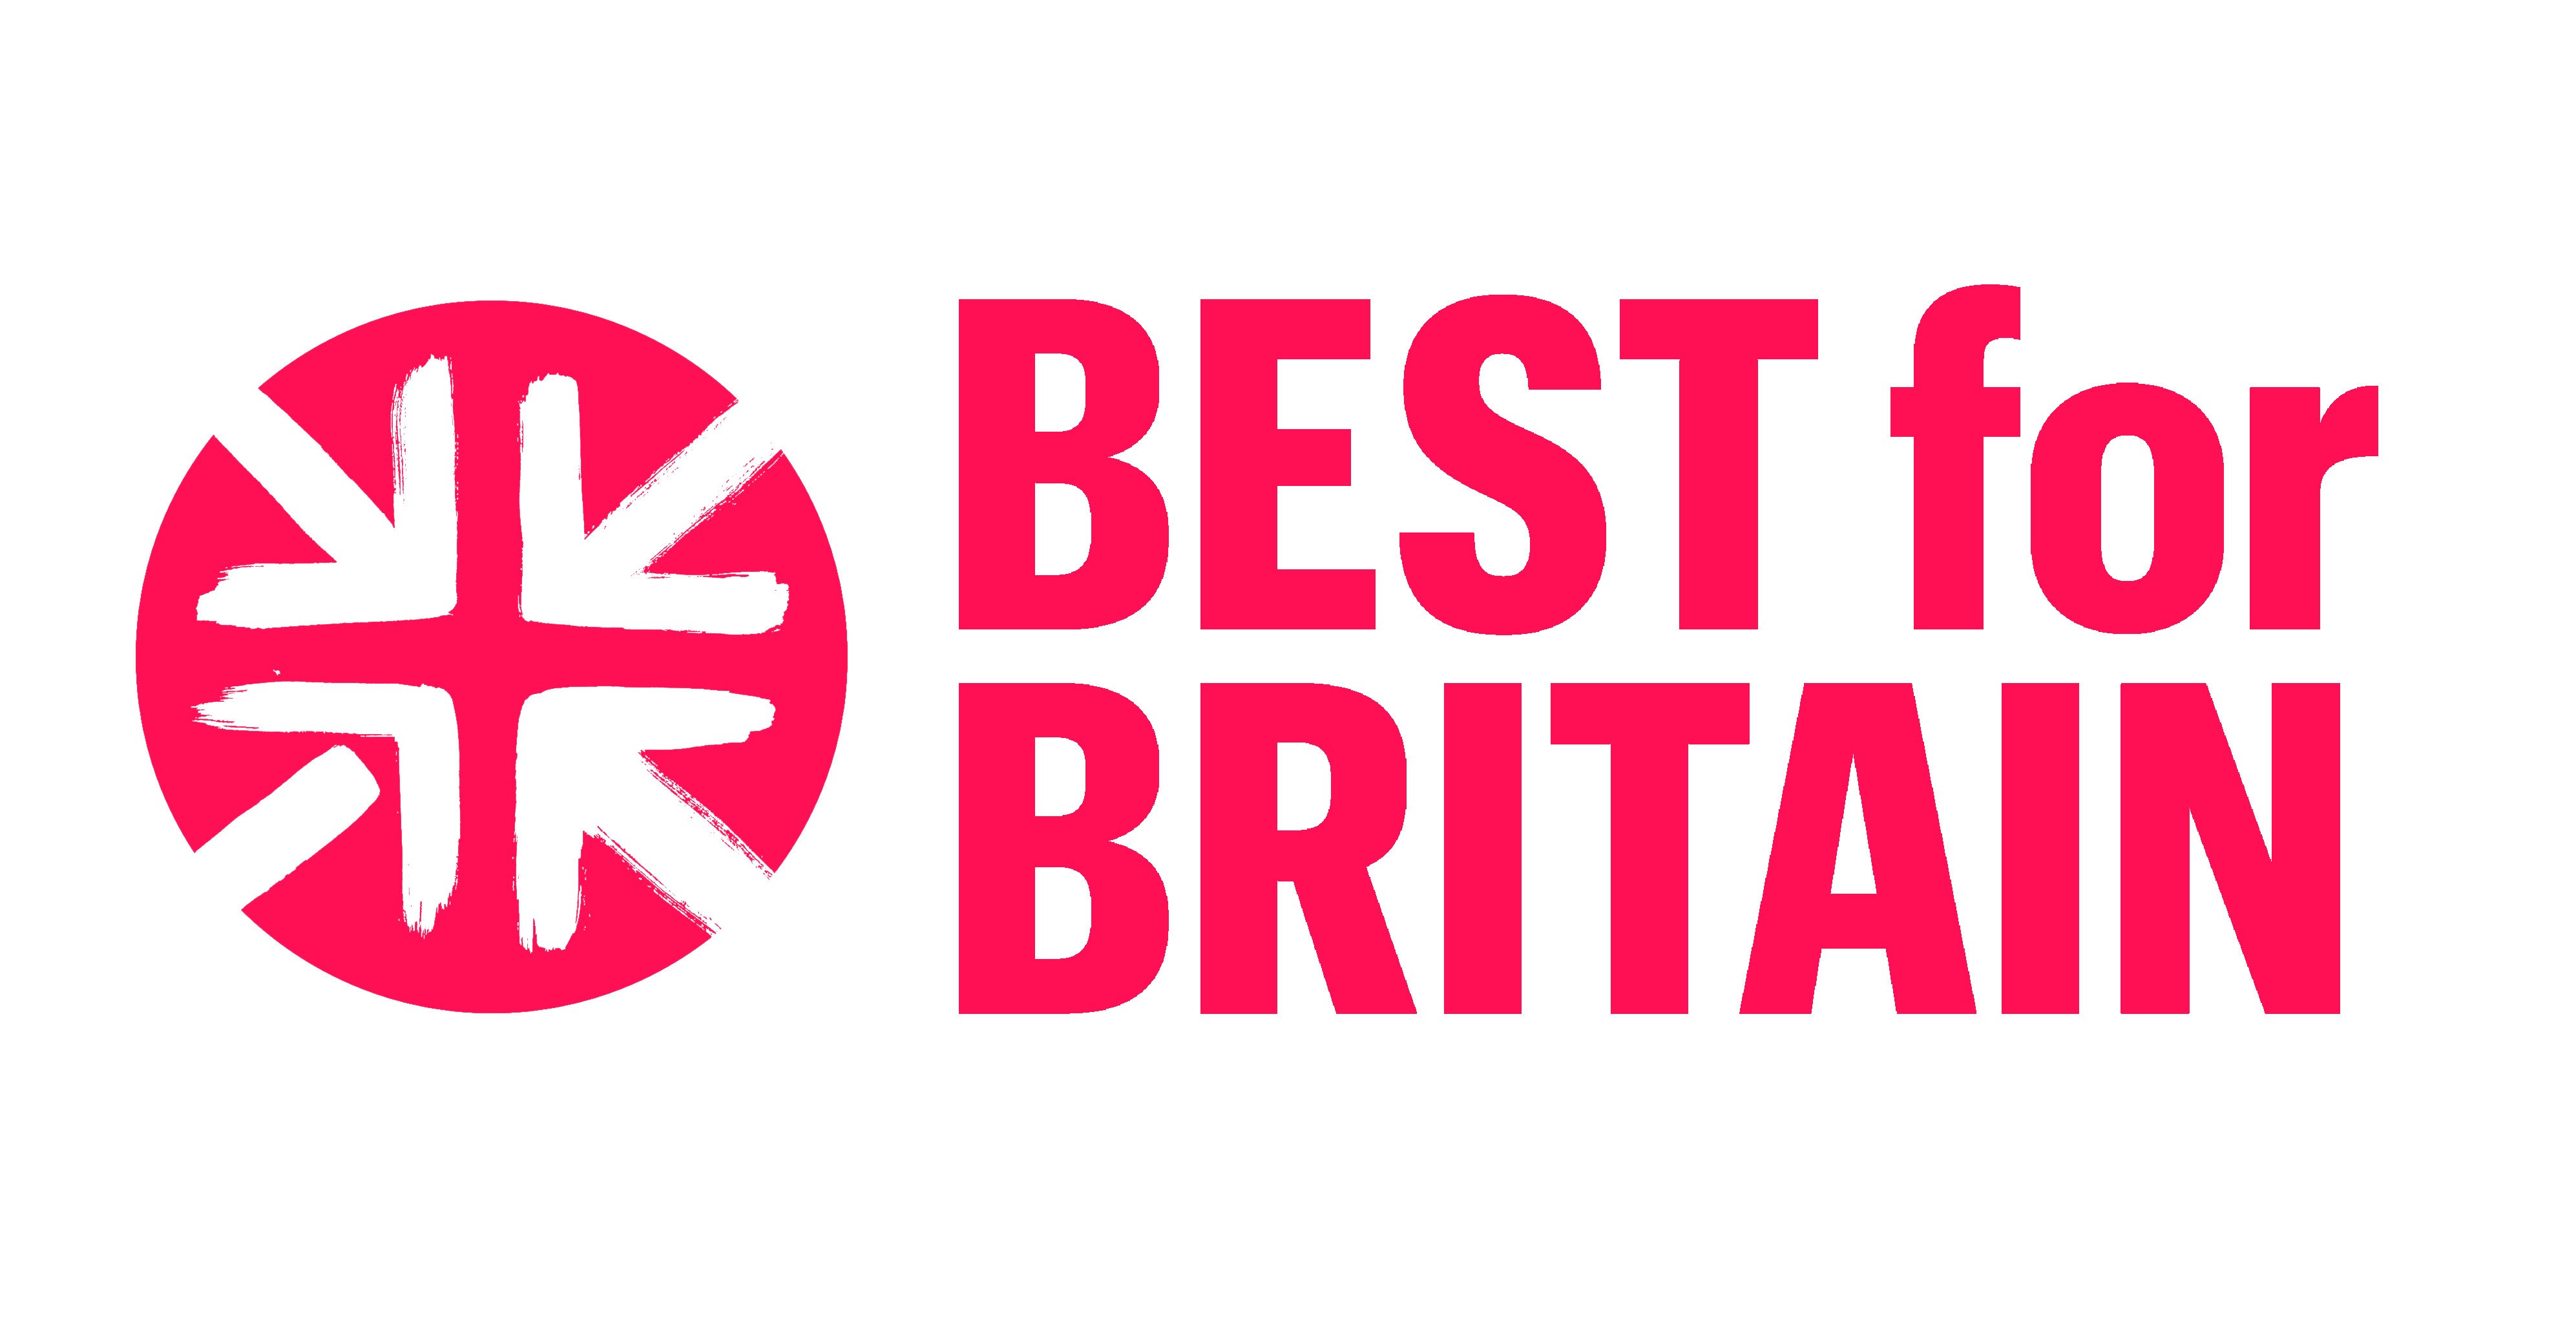 Best For Britain